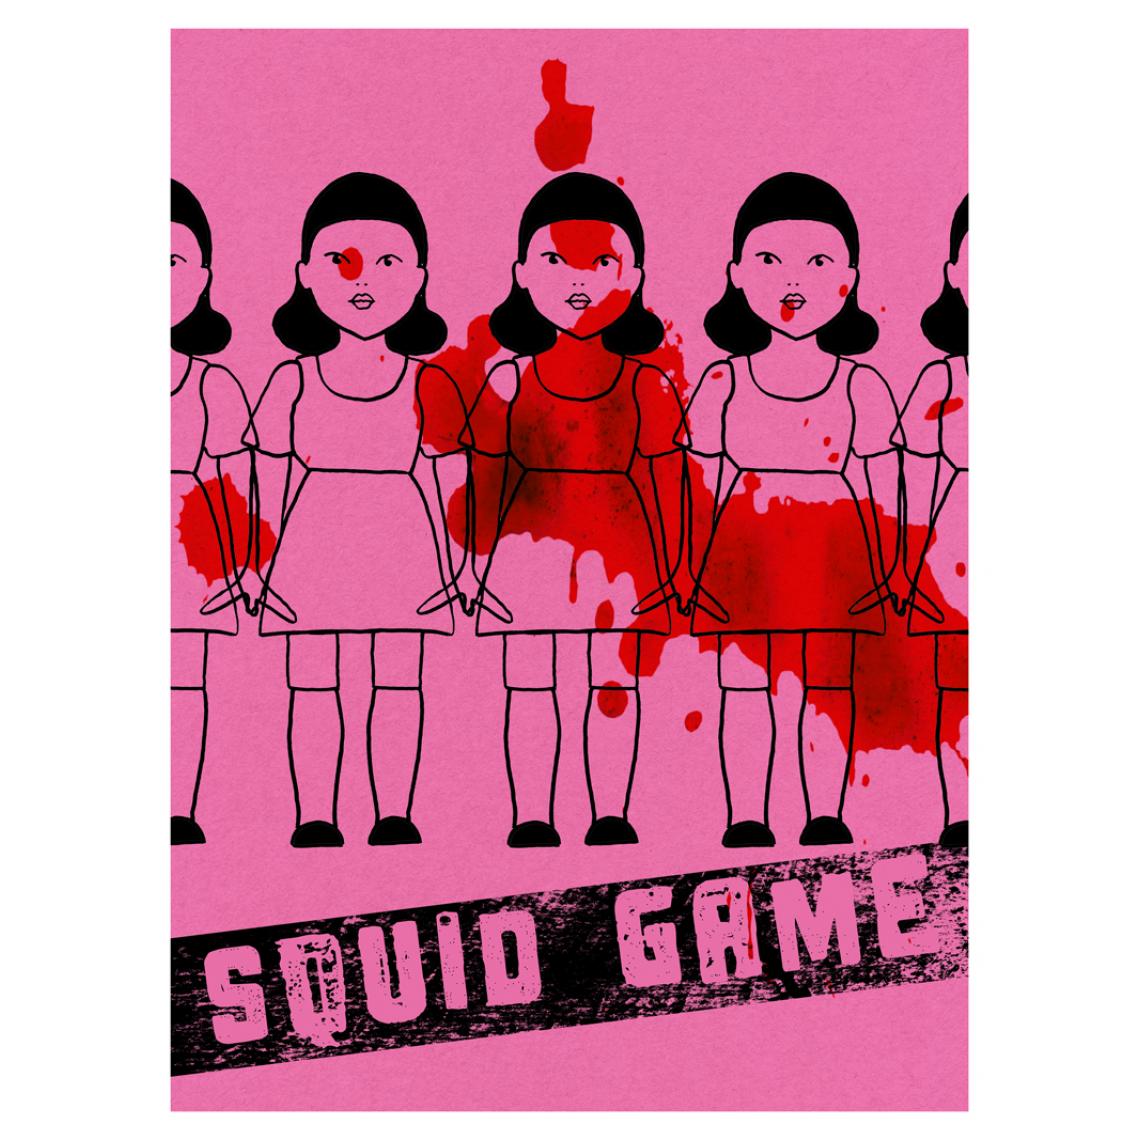 Beneffito - Squid game - Signature Poster - Doll - 30x40 cm - Affiches, posters